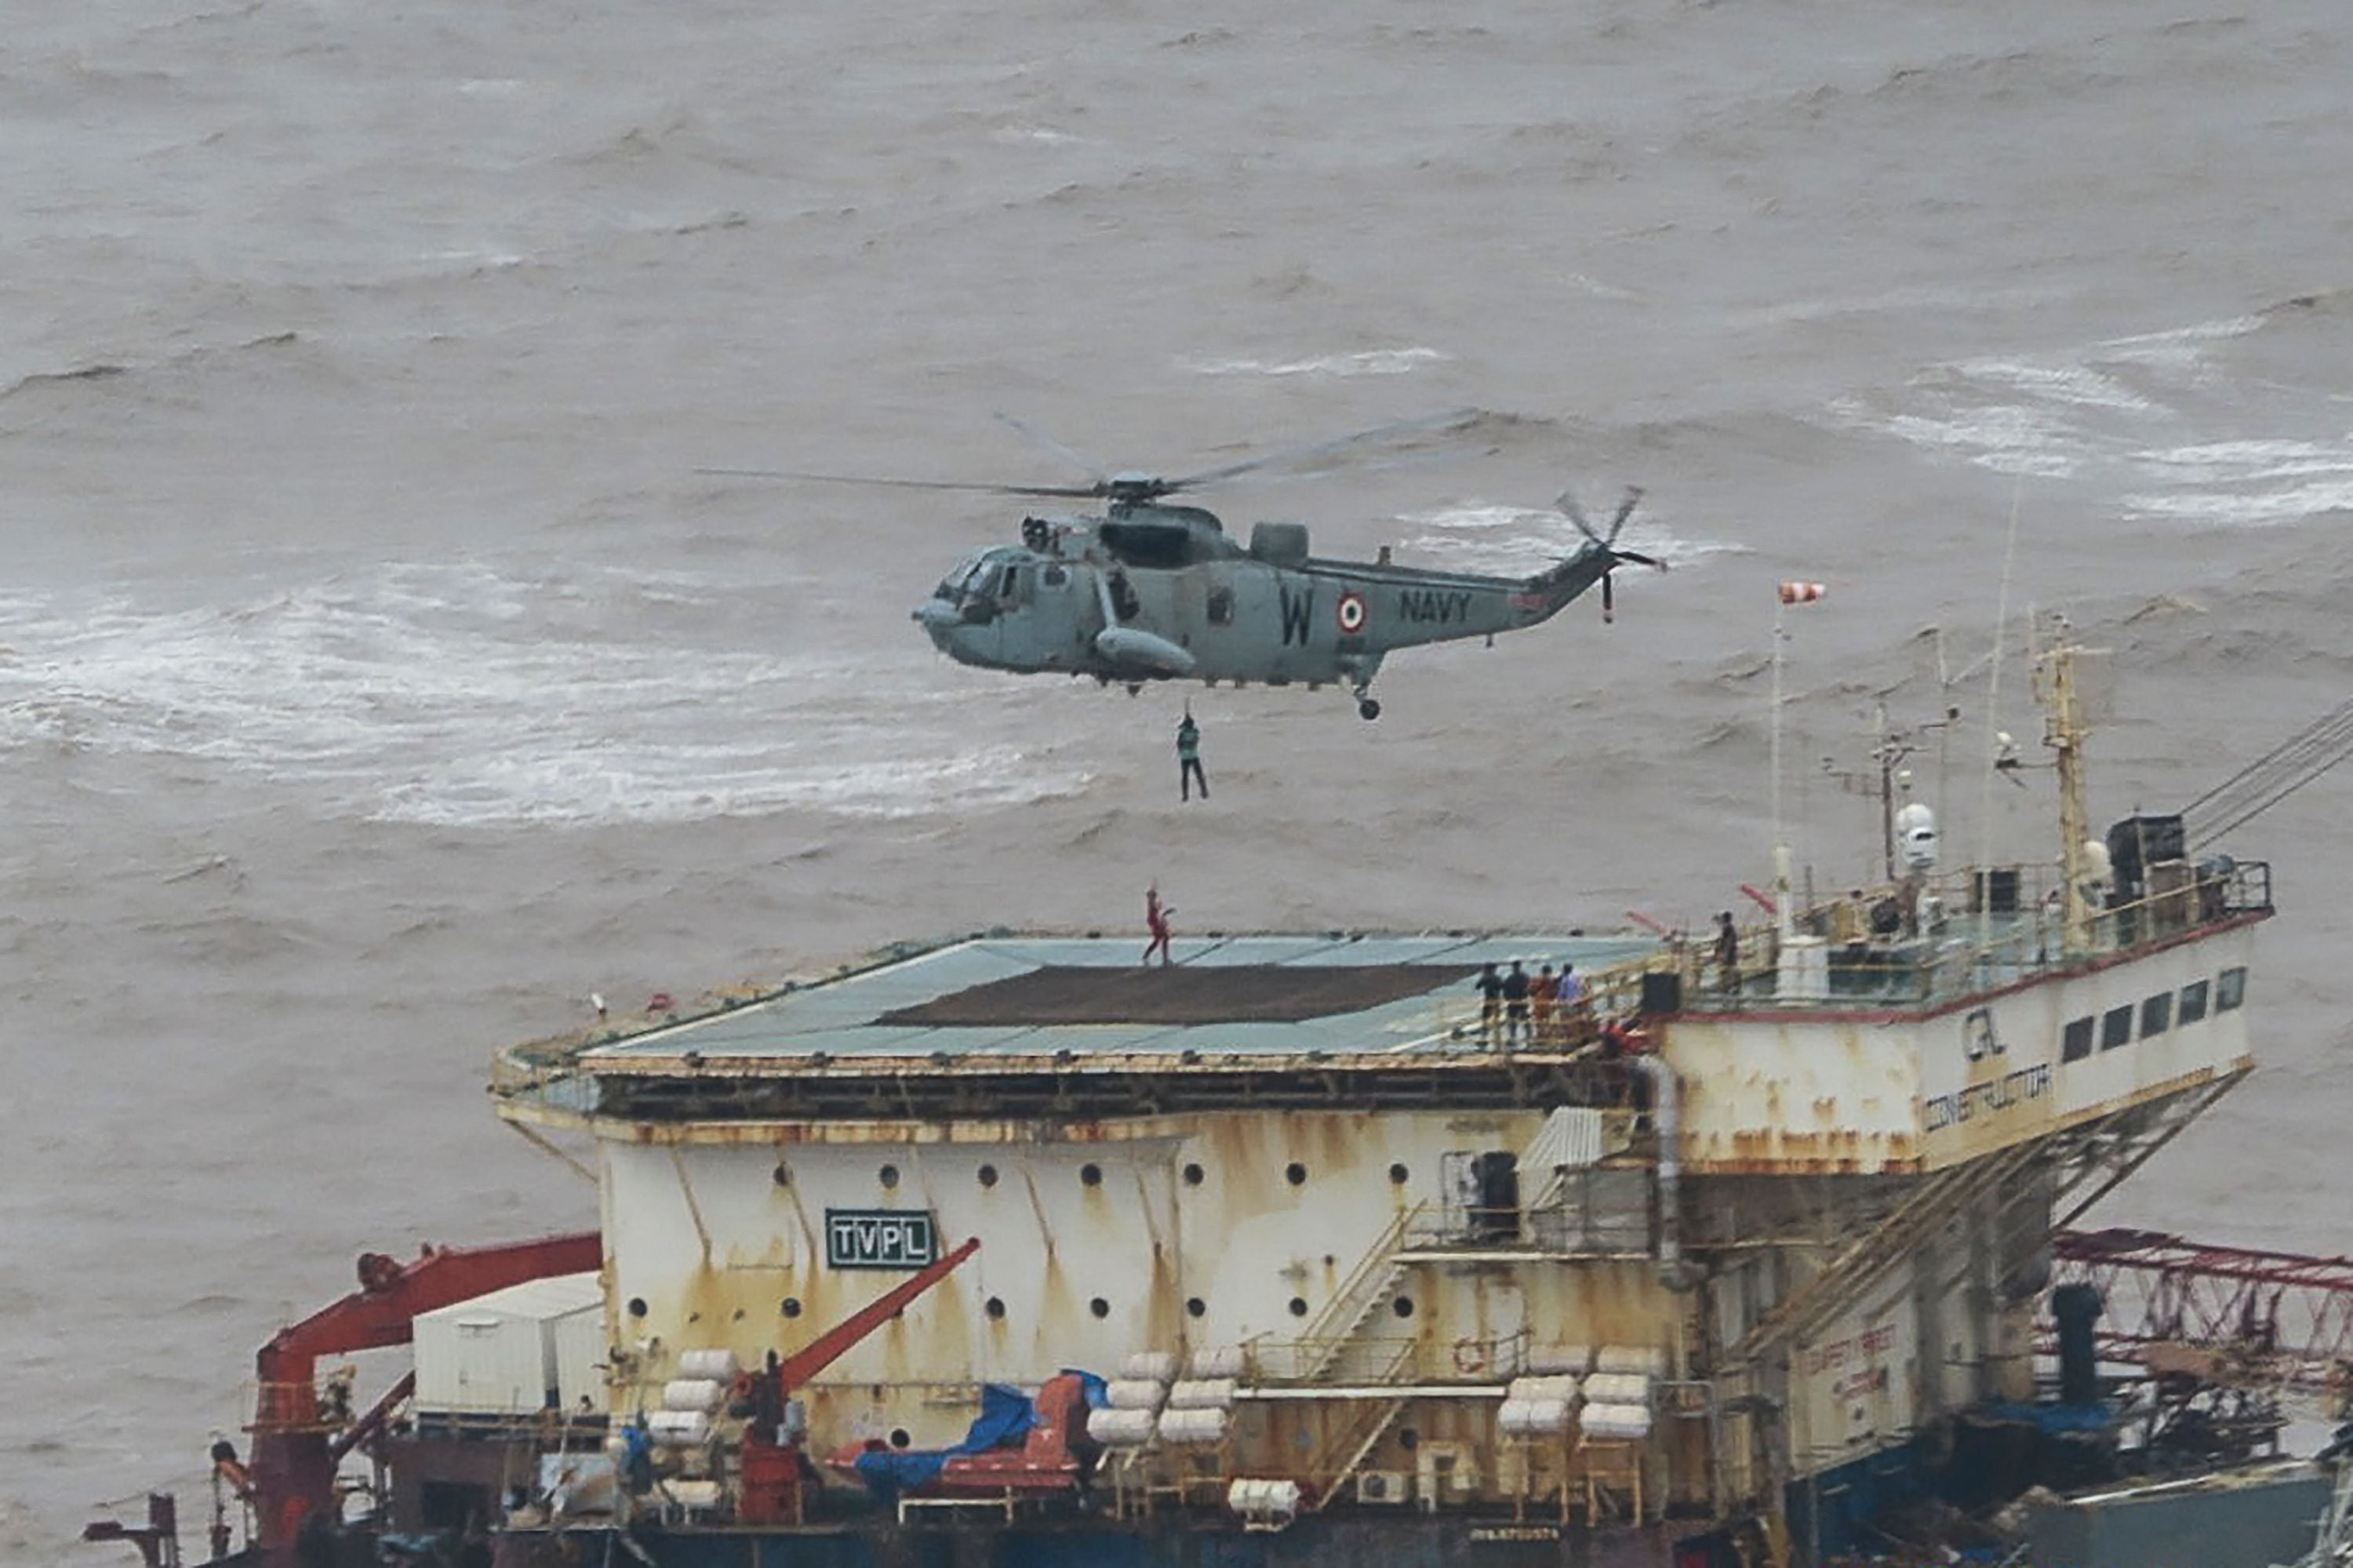 Stranded workers from a barge, which had gone adrift amidst heavy rain and strong winds due to Cyclone Tauktae, being airlifted by naval personnel